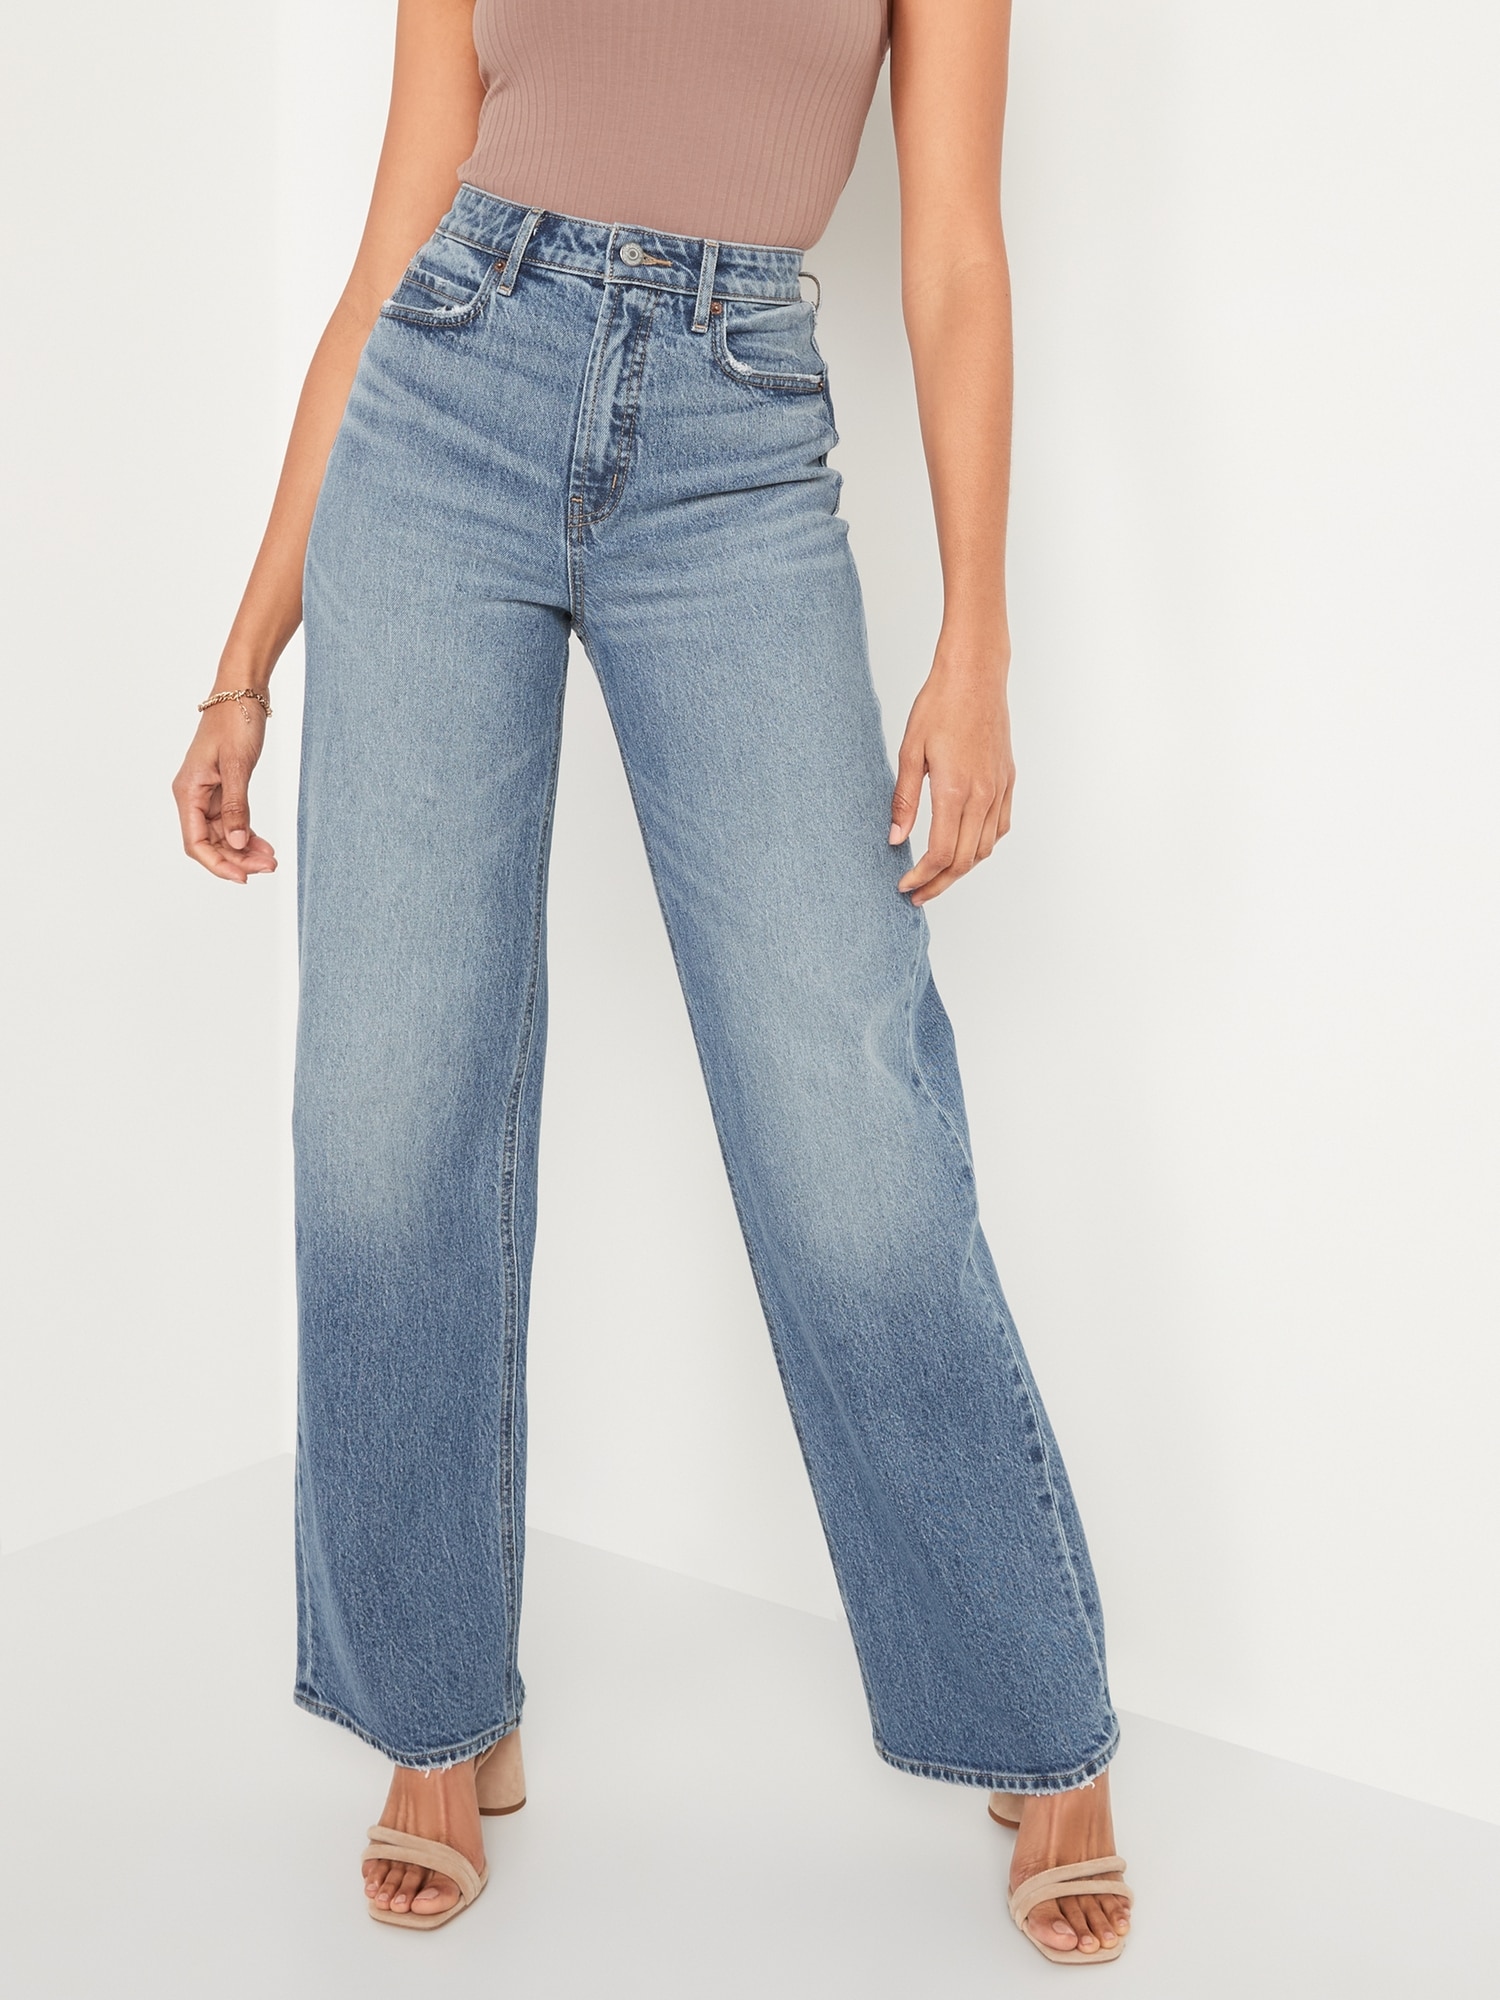 Extra Long Jeans for Women | Old Navy